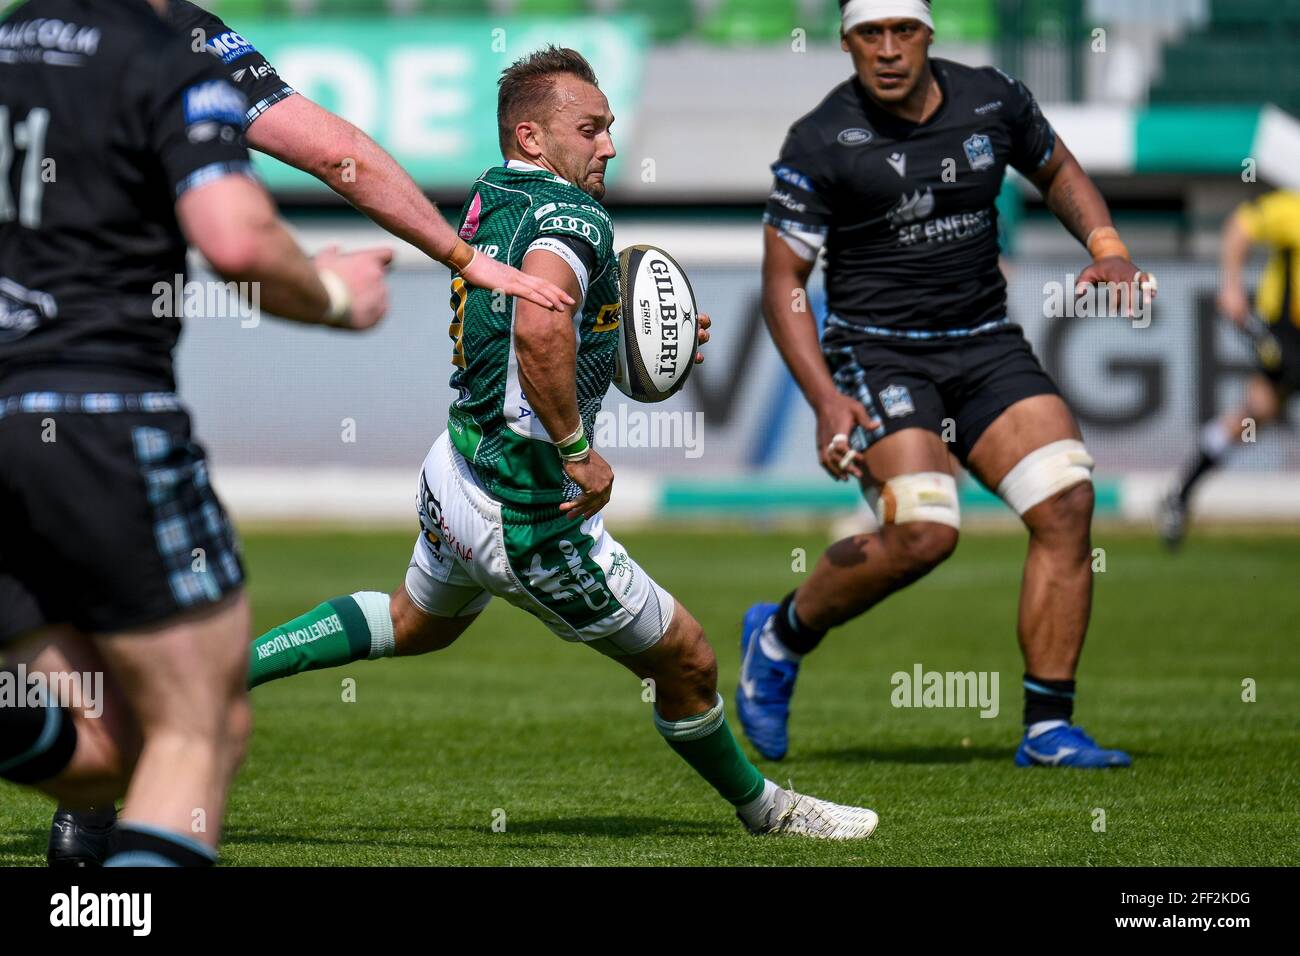 Treviso, Italy. 24th Apr, 2021. Benetton Treviso vs Glasgow Warriors, Rugby  Guinness Pro 14 match in Treviso, Italy, April 24 2021 Credit: Independent  Photo Agency/Alamy Live News Stock Photo - Alamy